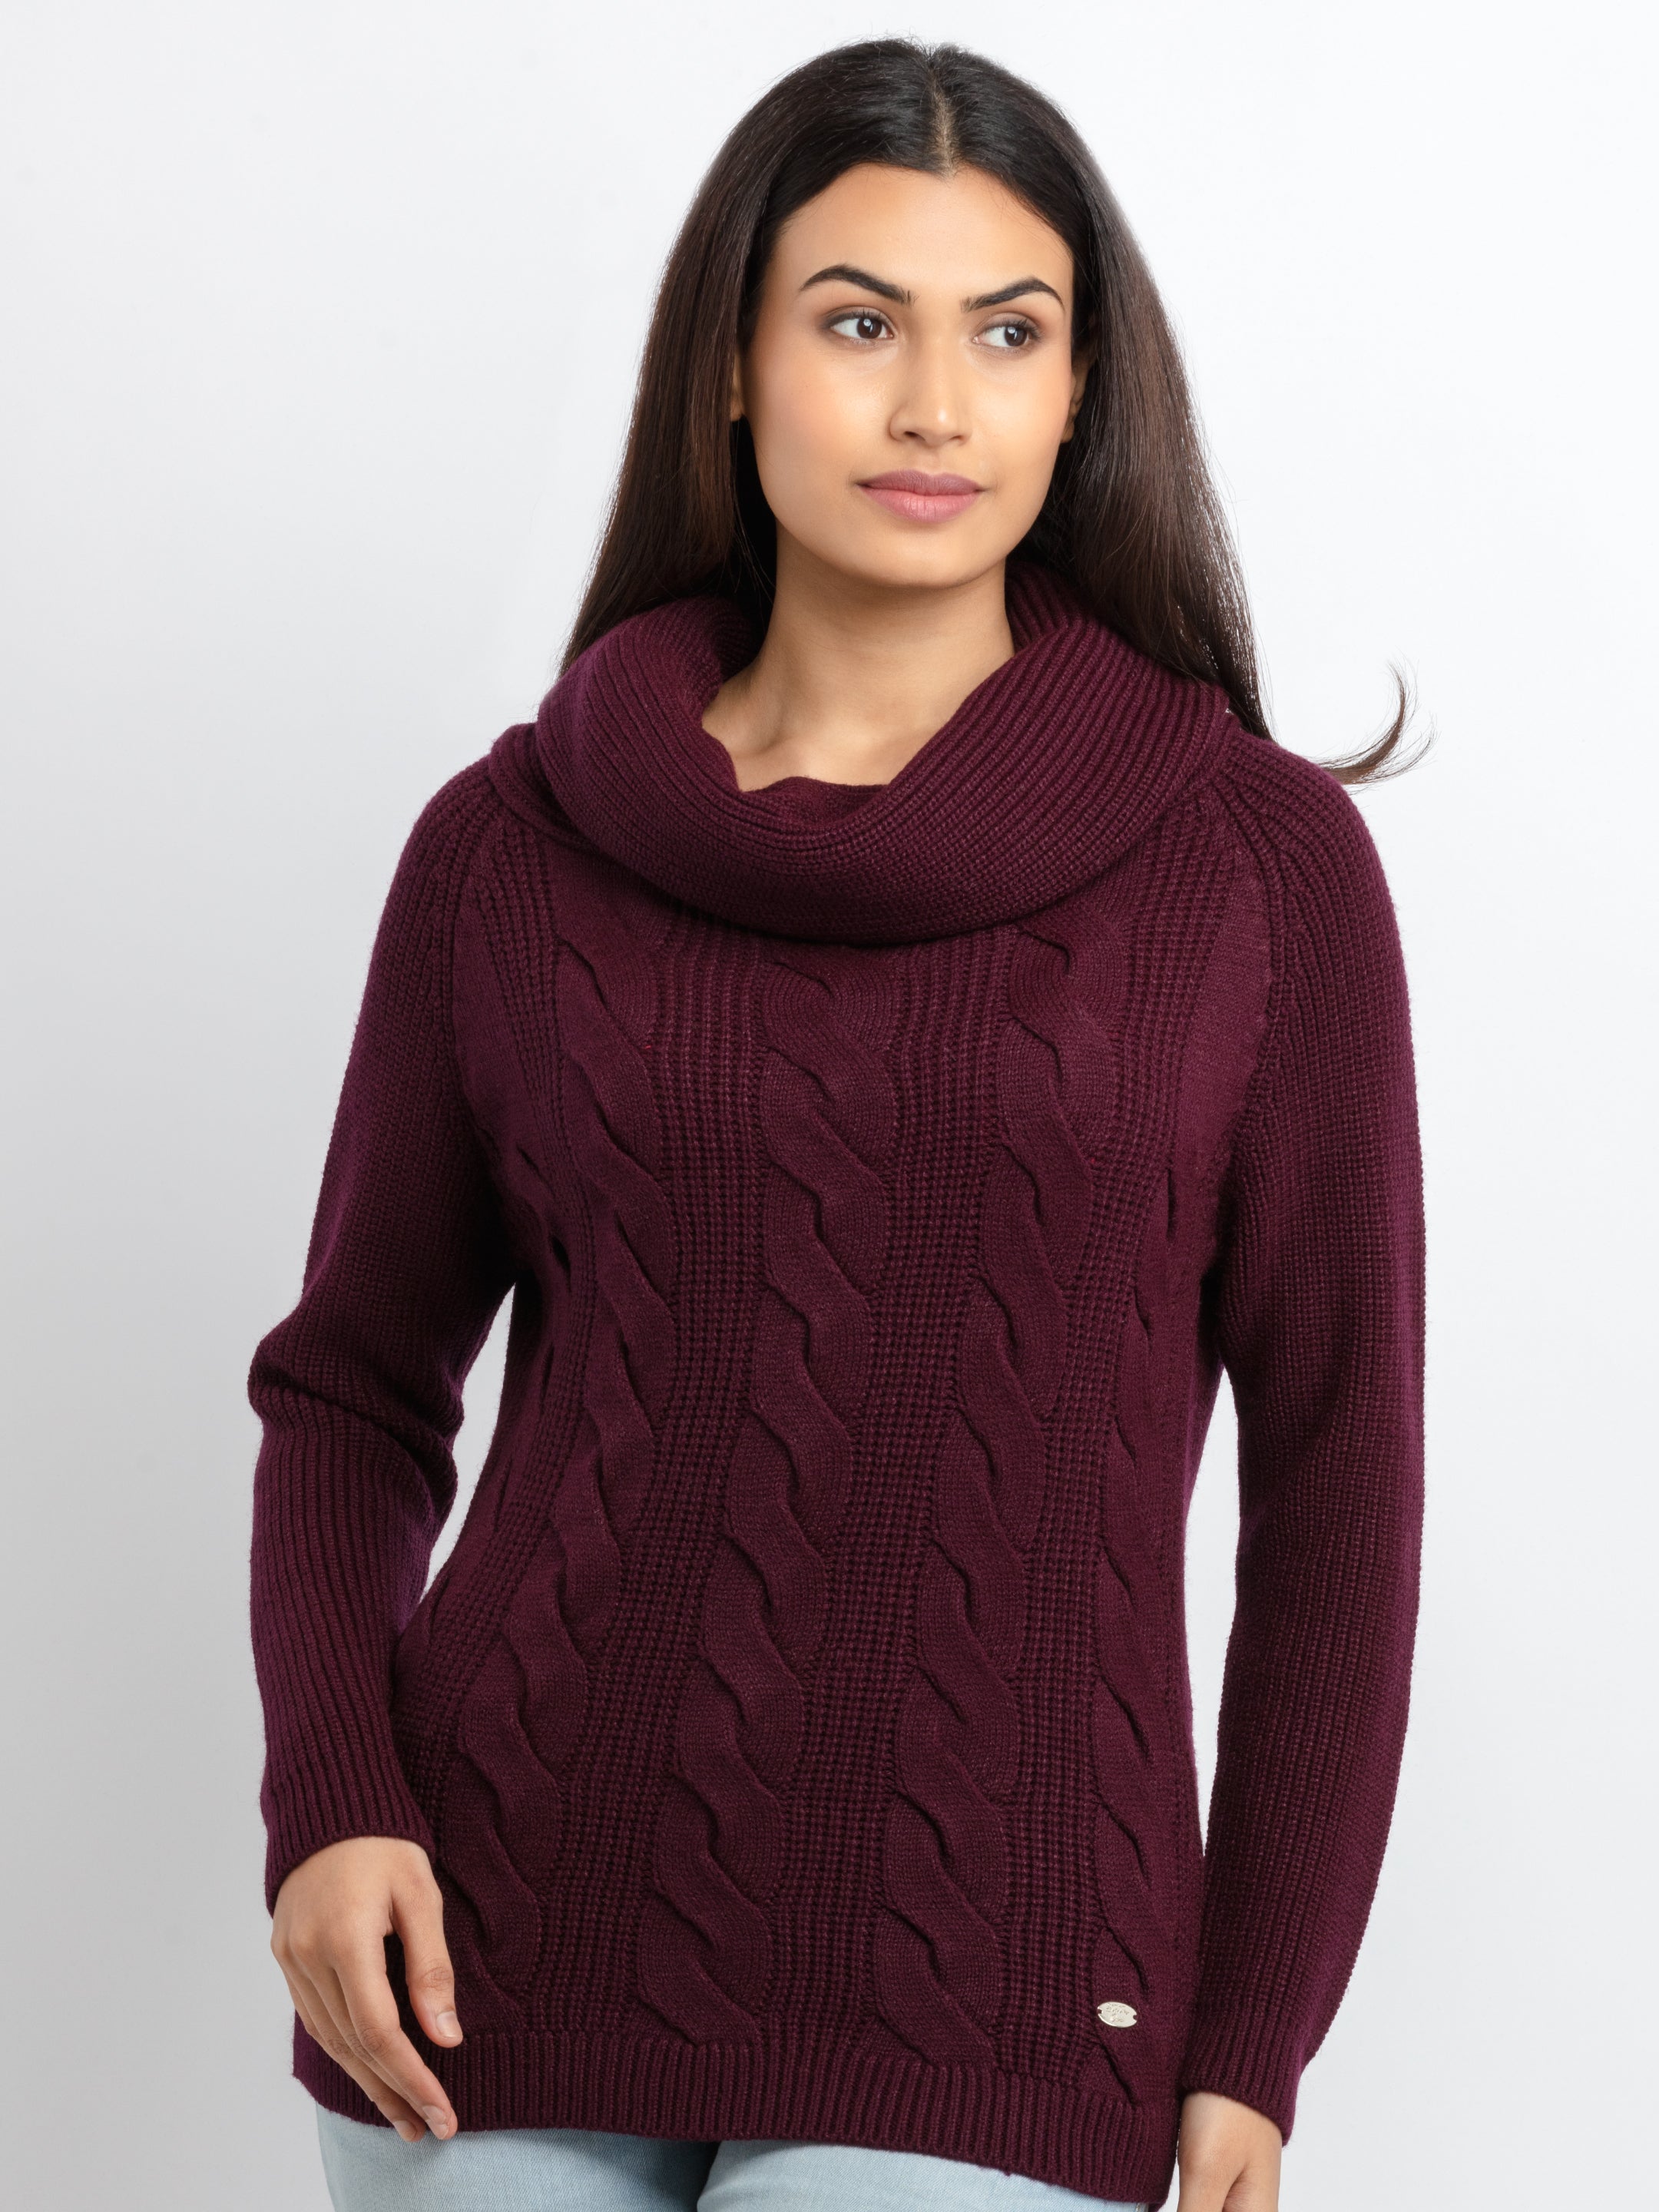 Womens Cable Knit Cowl Neck Sweater - S / Wine / SQW-FK-22983-Wine